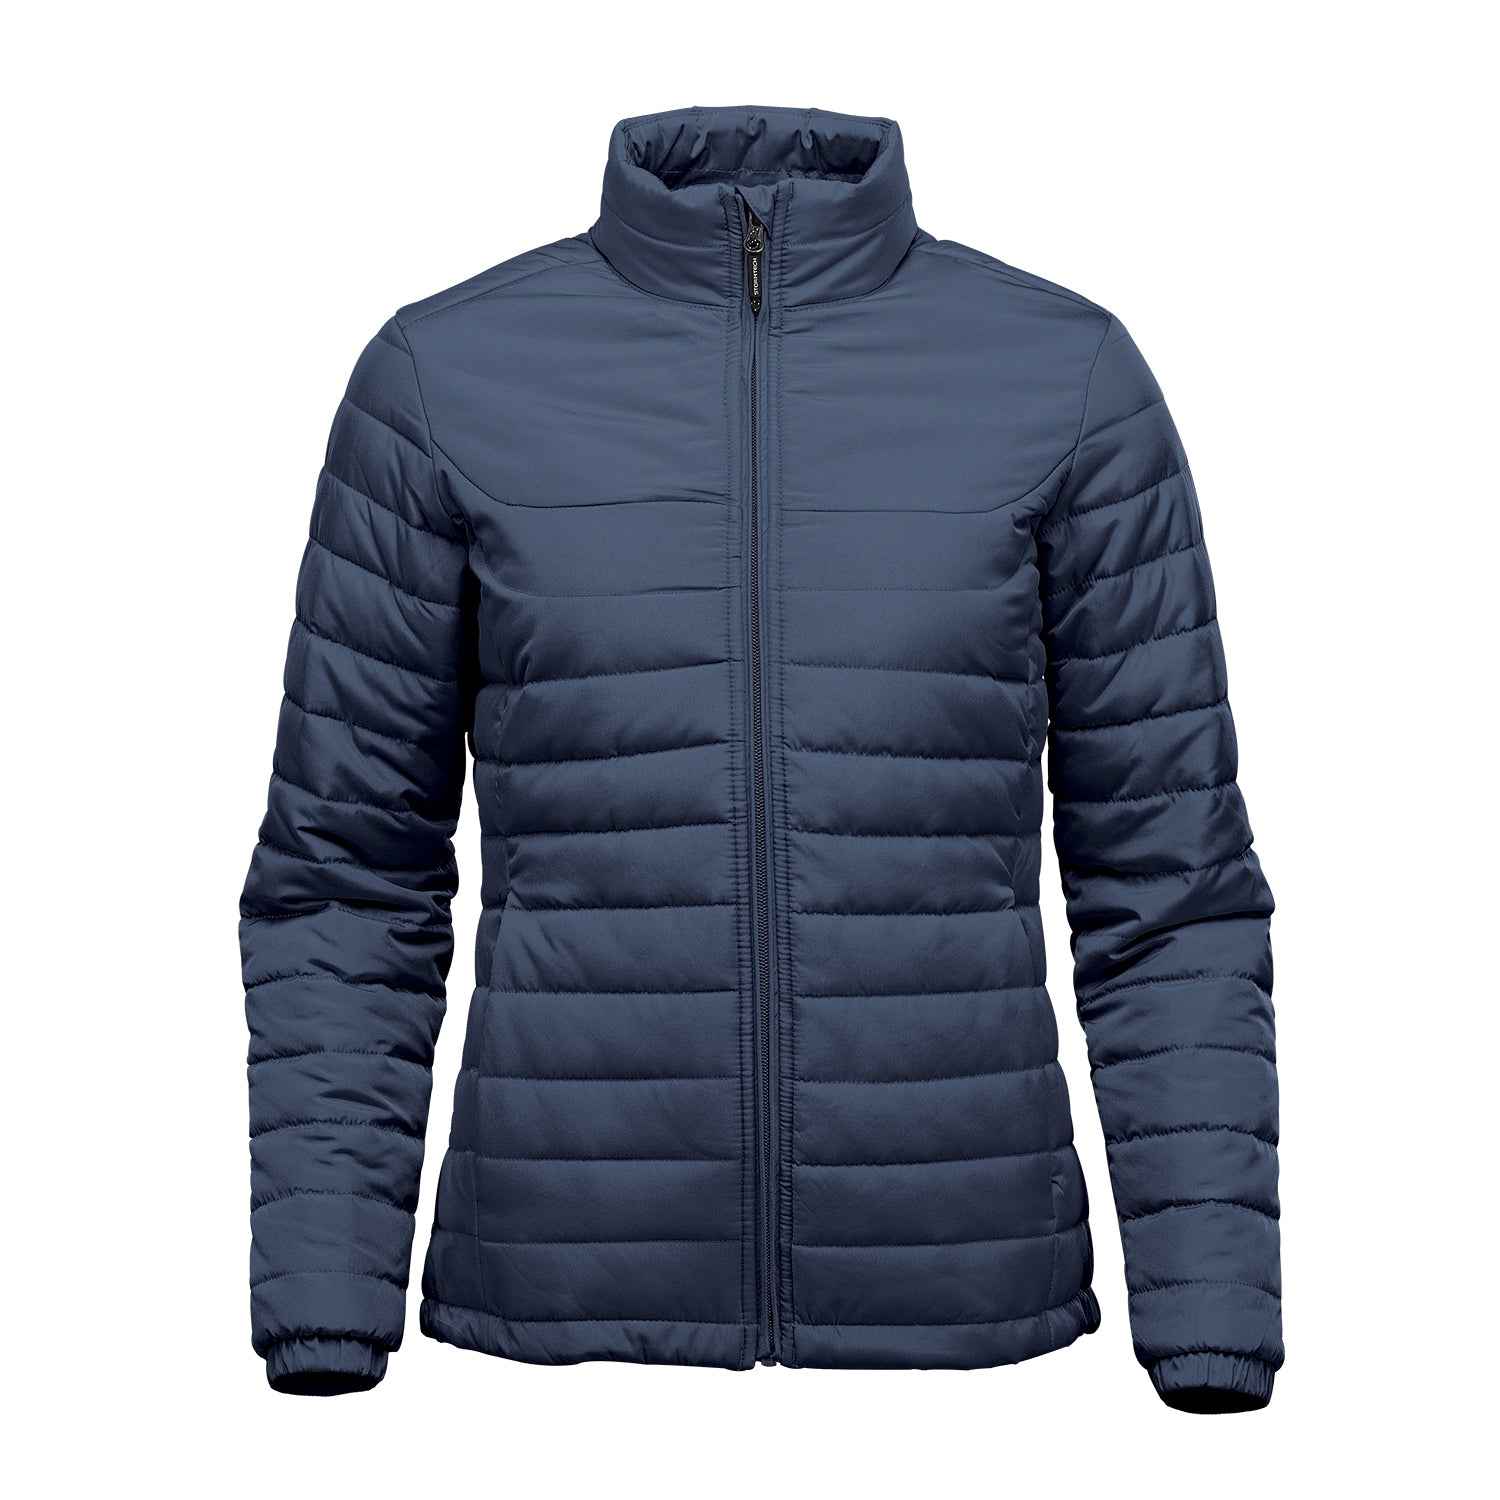 Women's Quilted Jackets & Padded Jackets